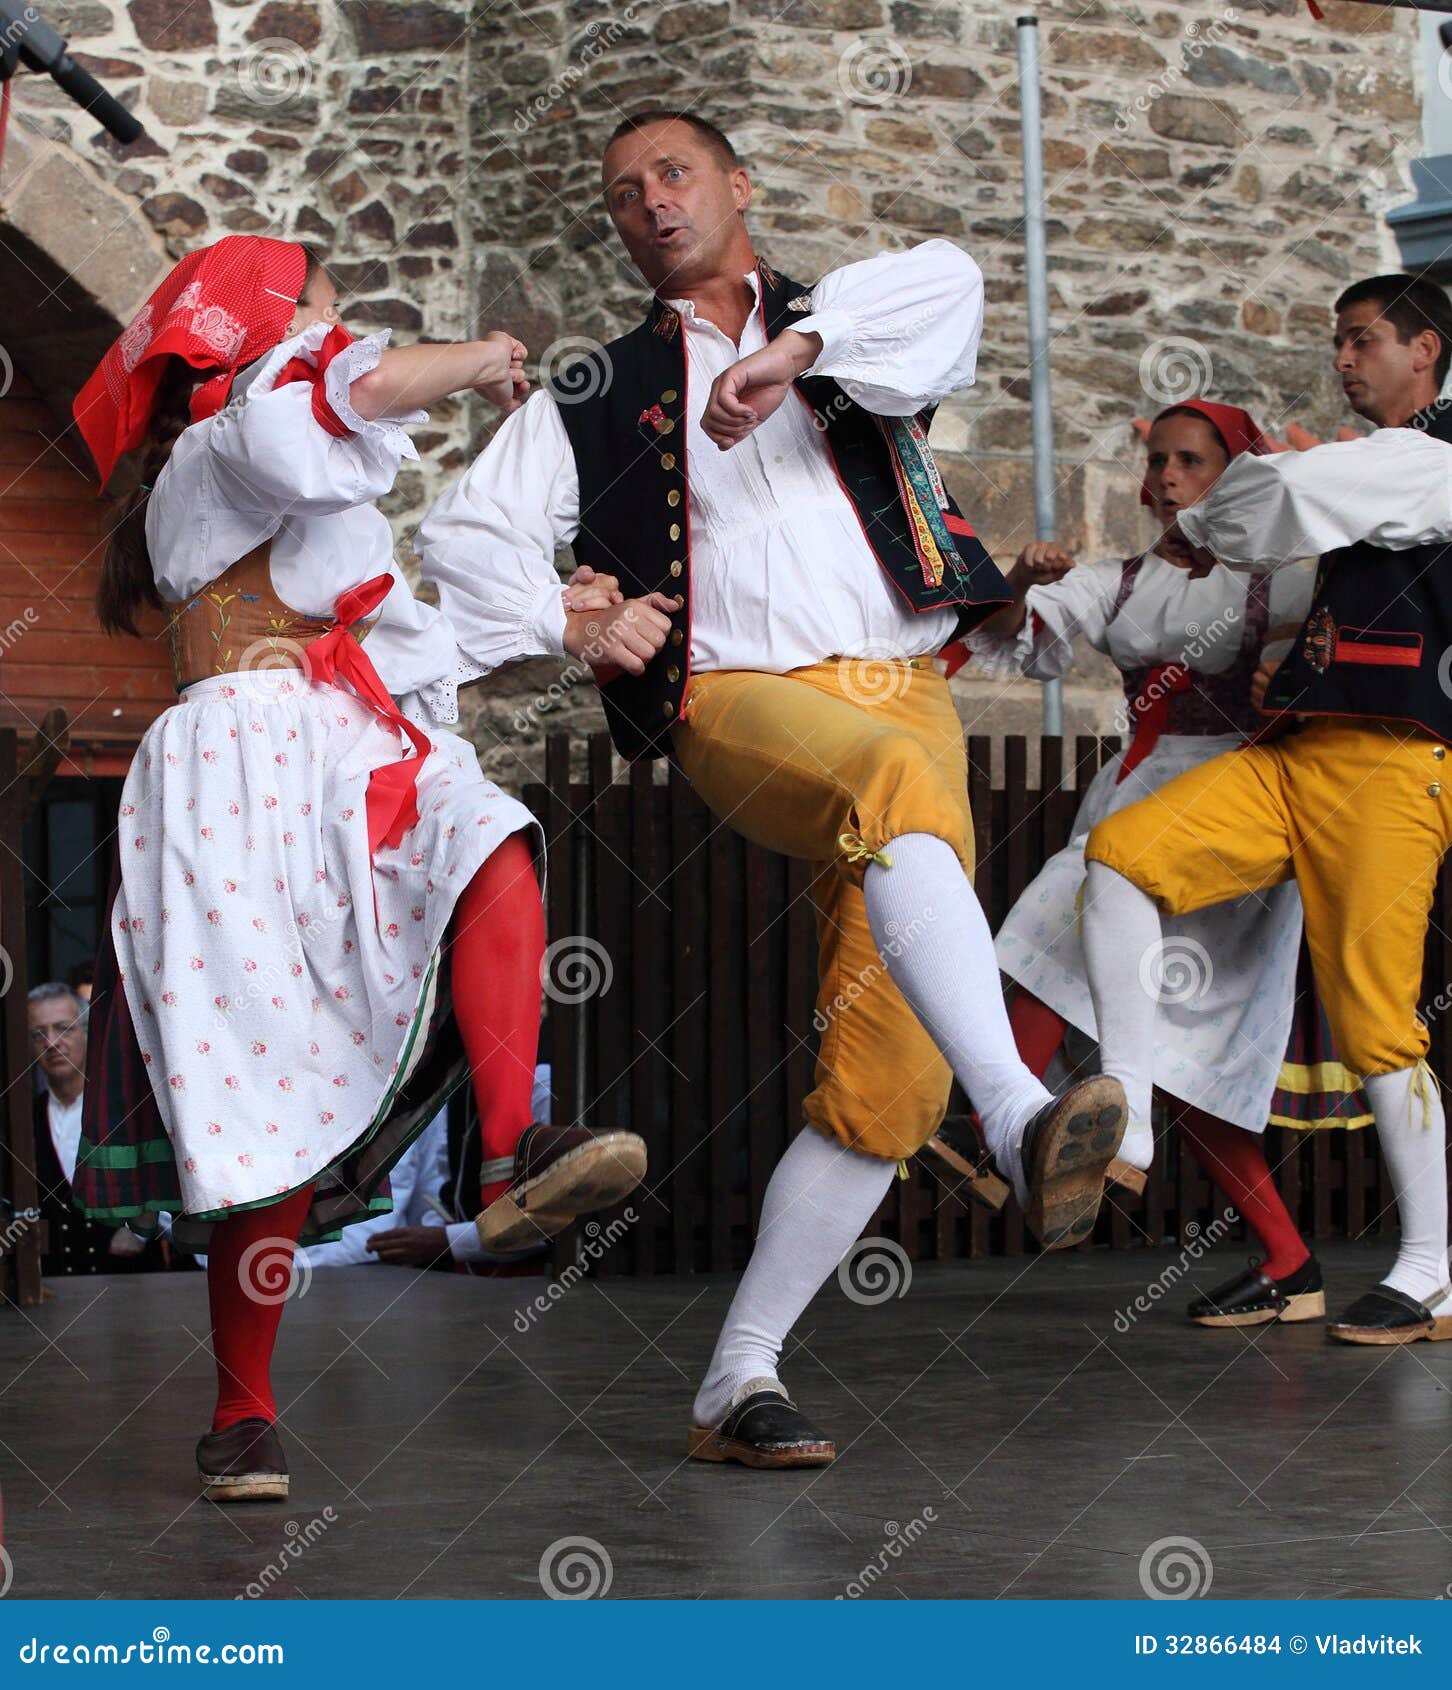 People Dressed In Czech Traditional Garb Dancing And ...